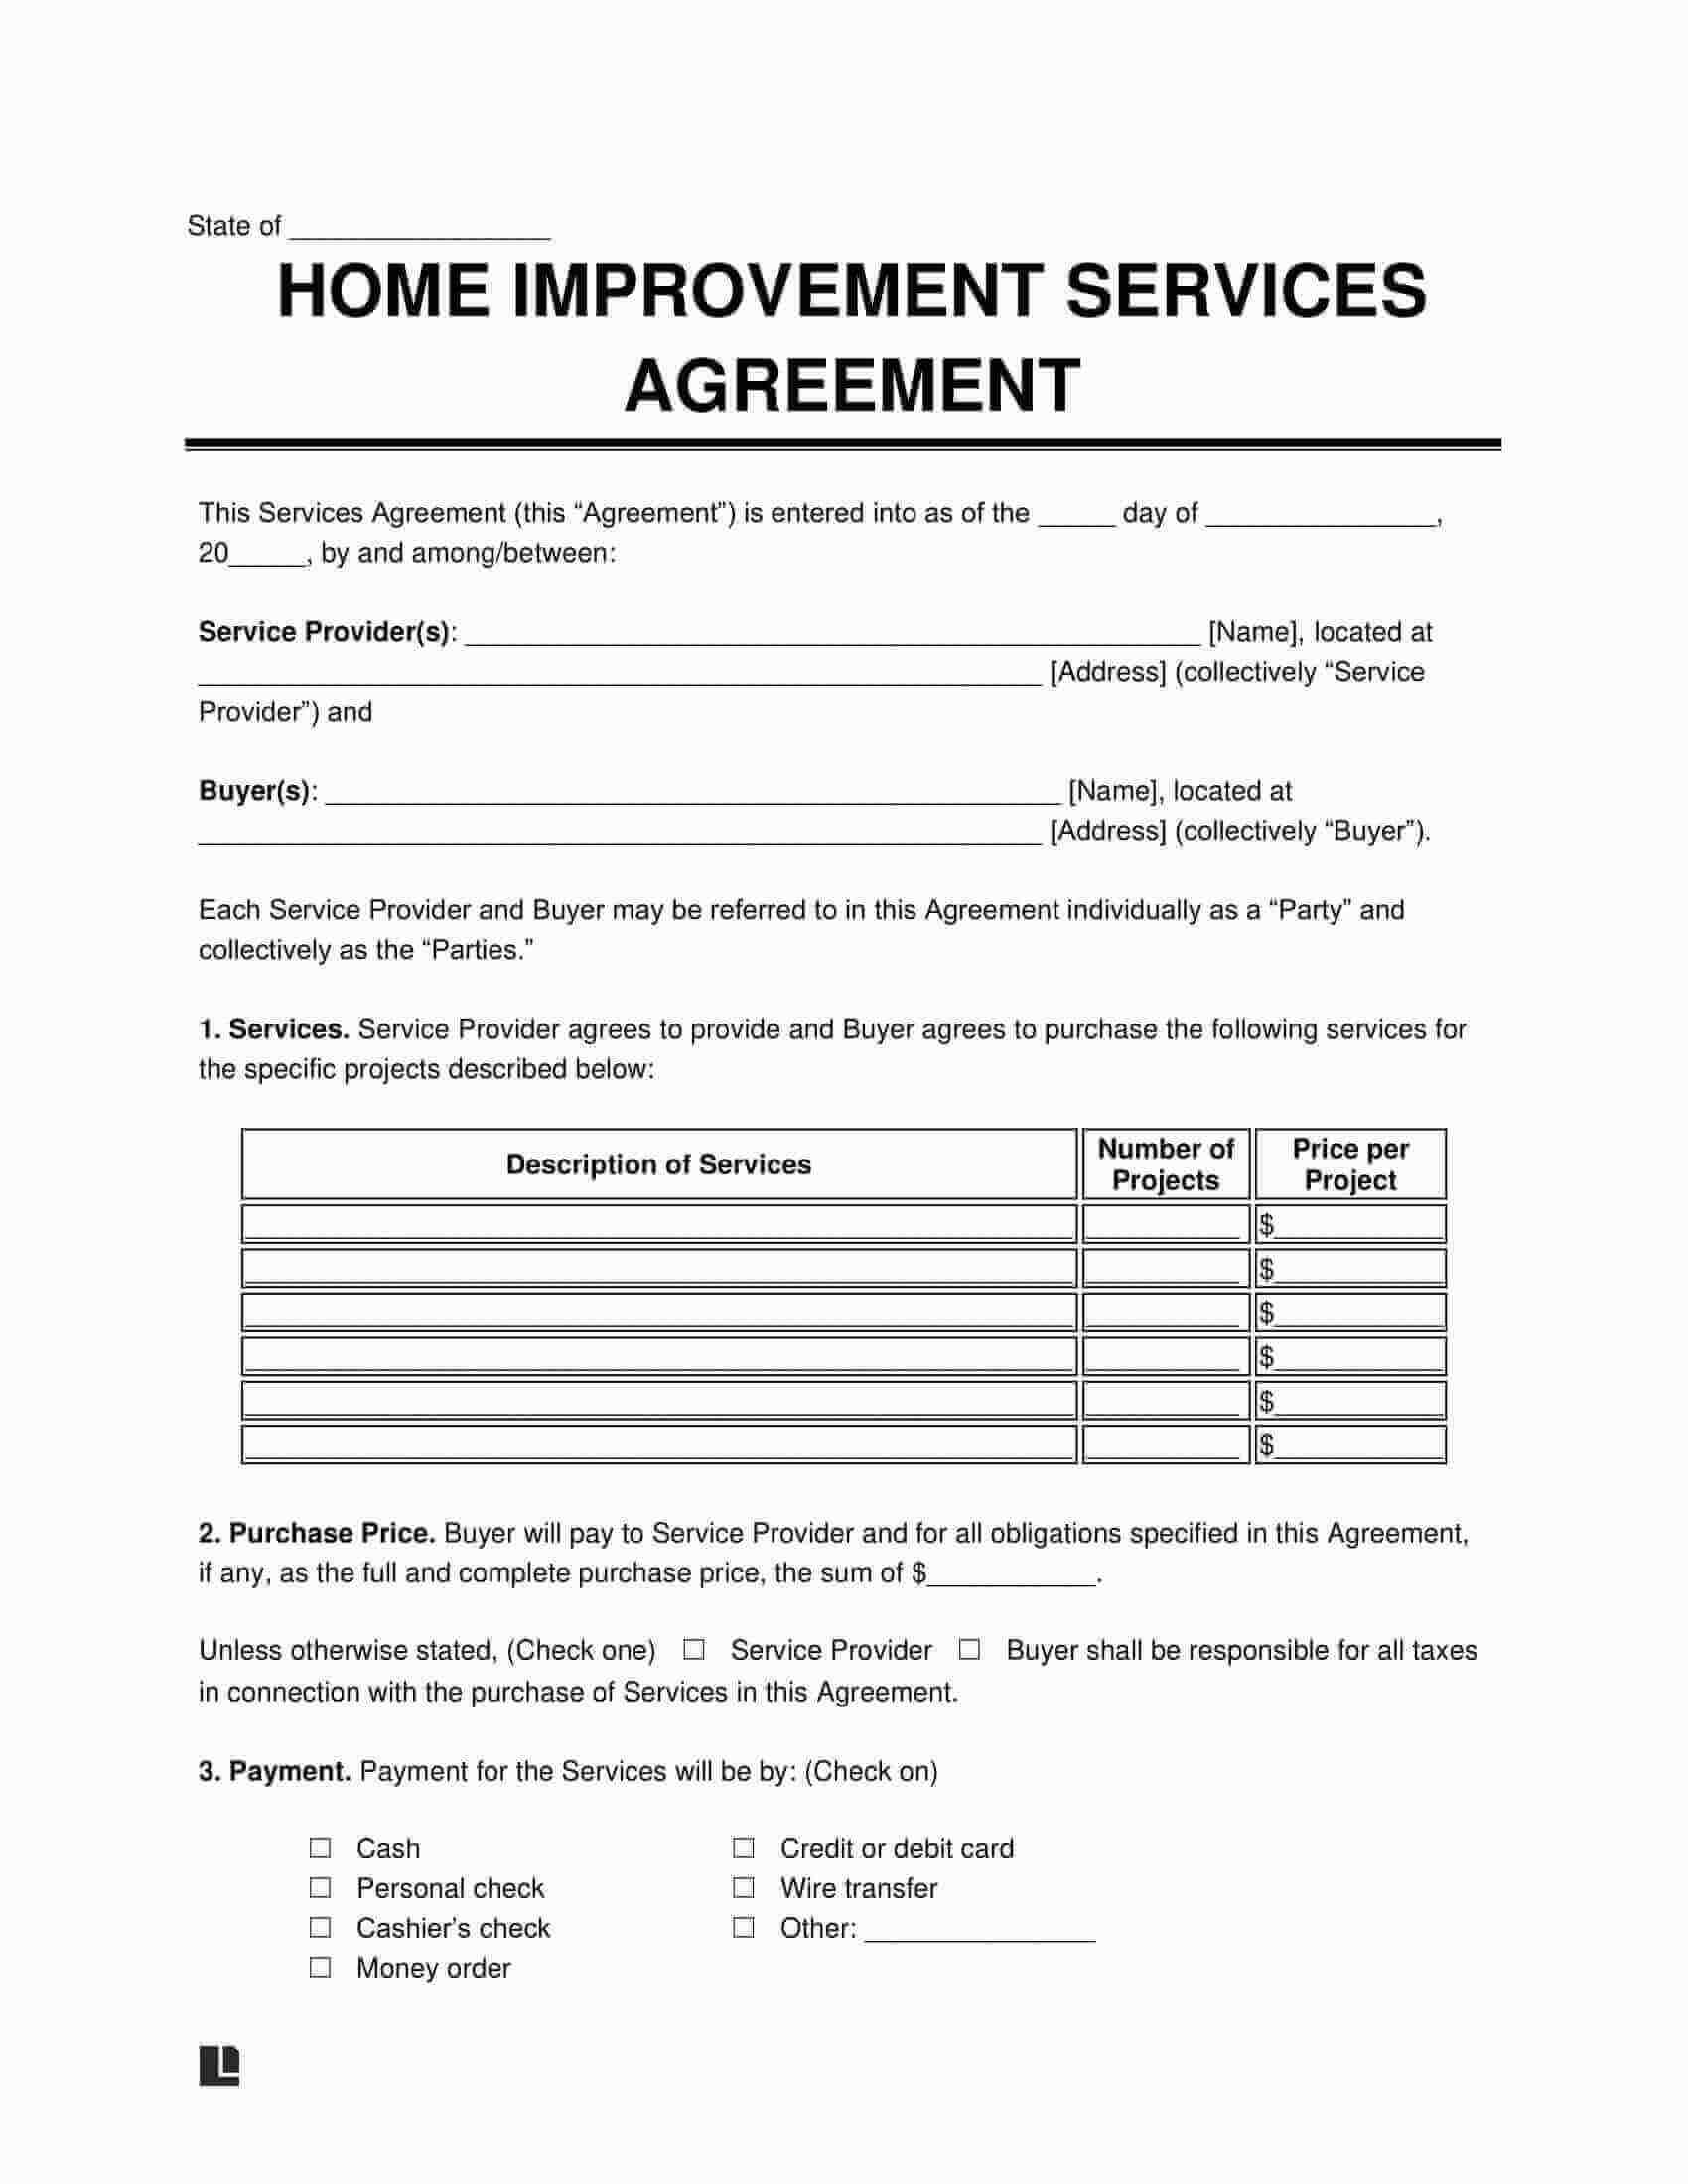 home improvement services agreement